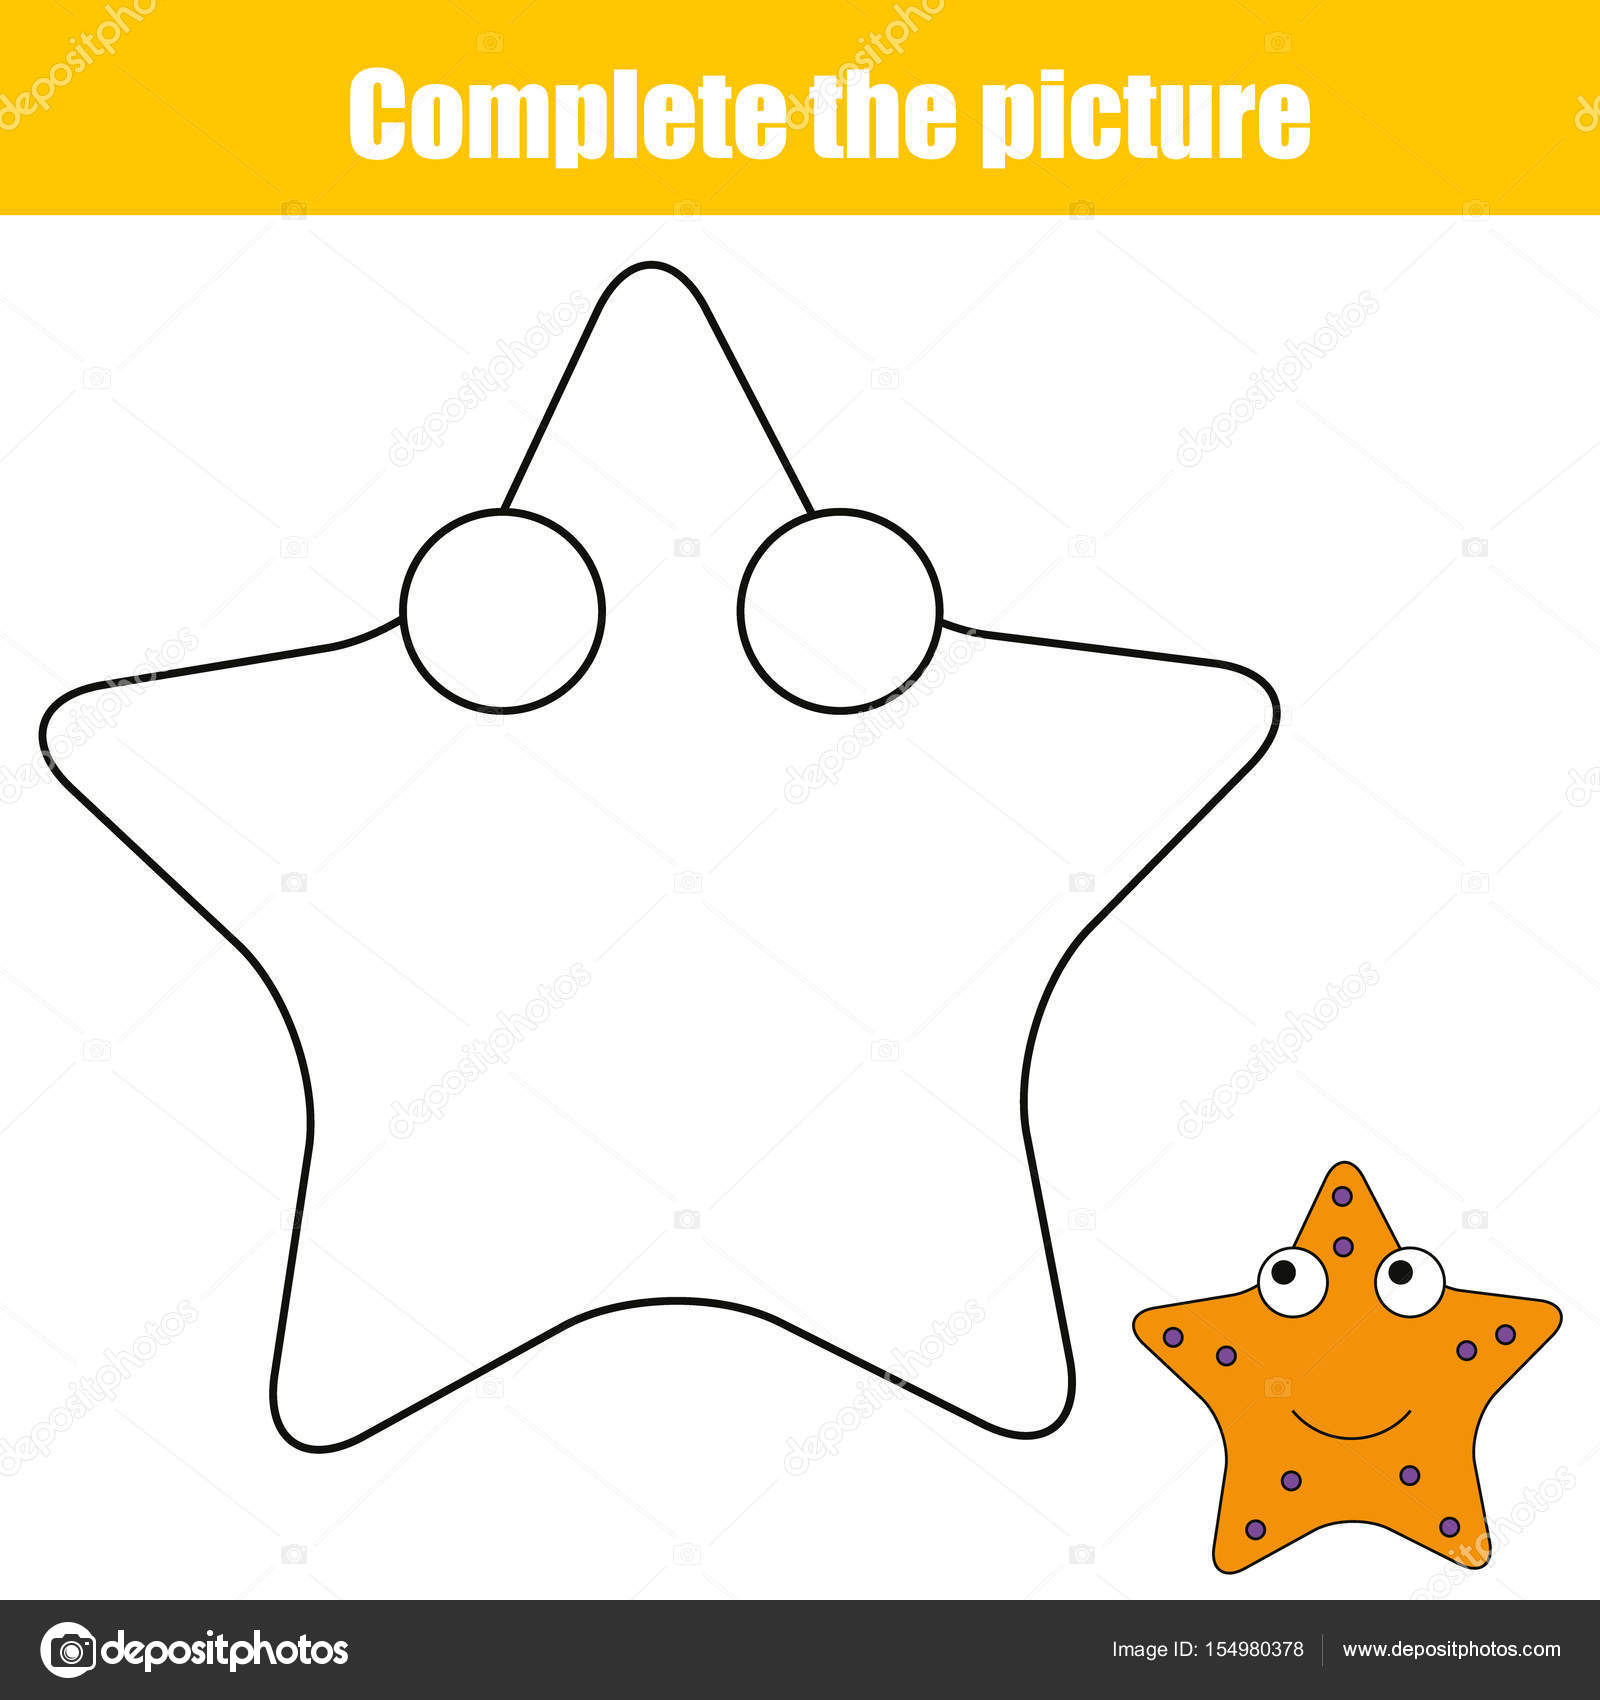 Plete the picture children educational game coloring page kids activity sheet with starfish stock vector by ksuklein